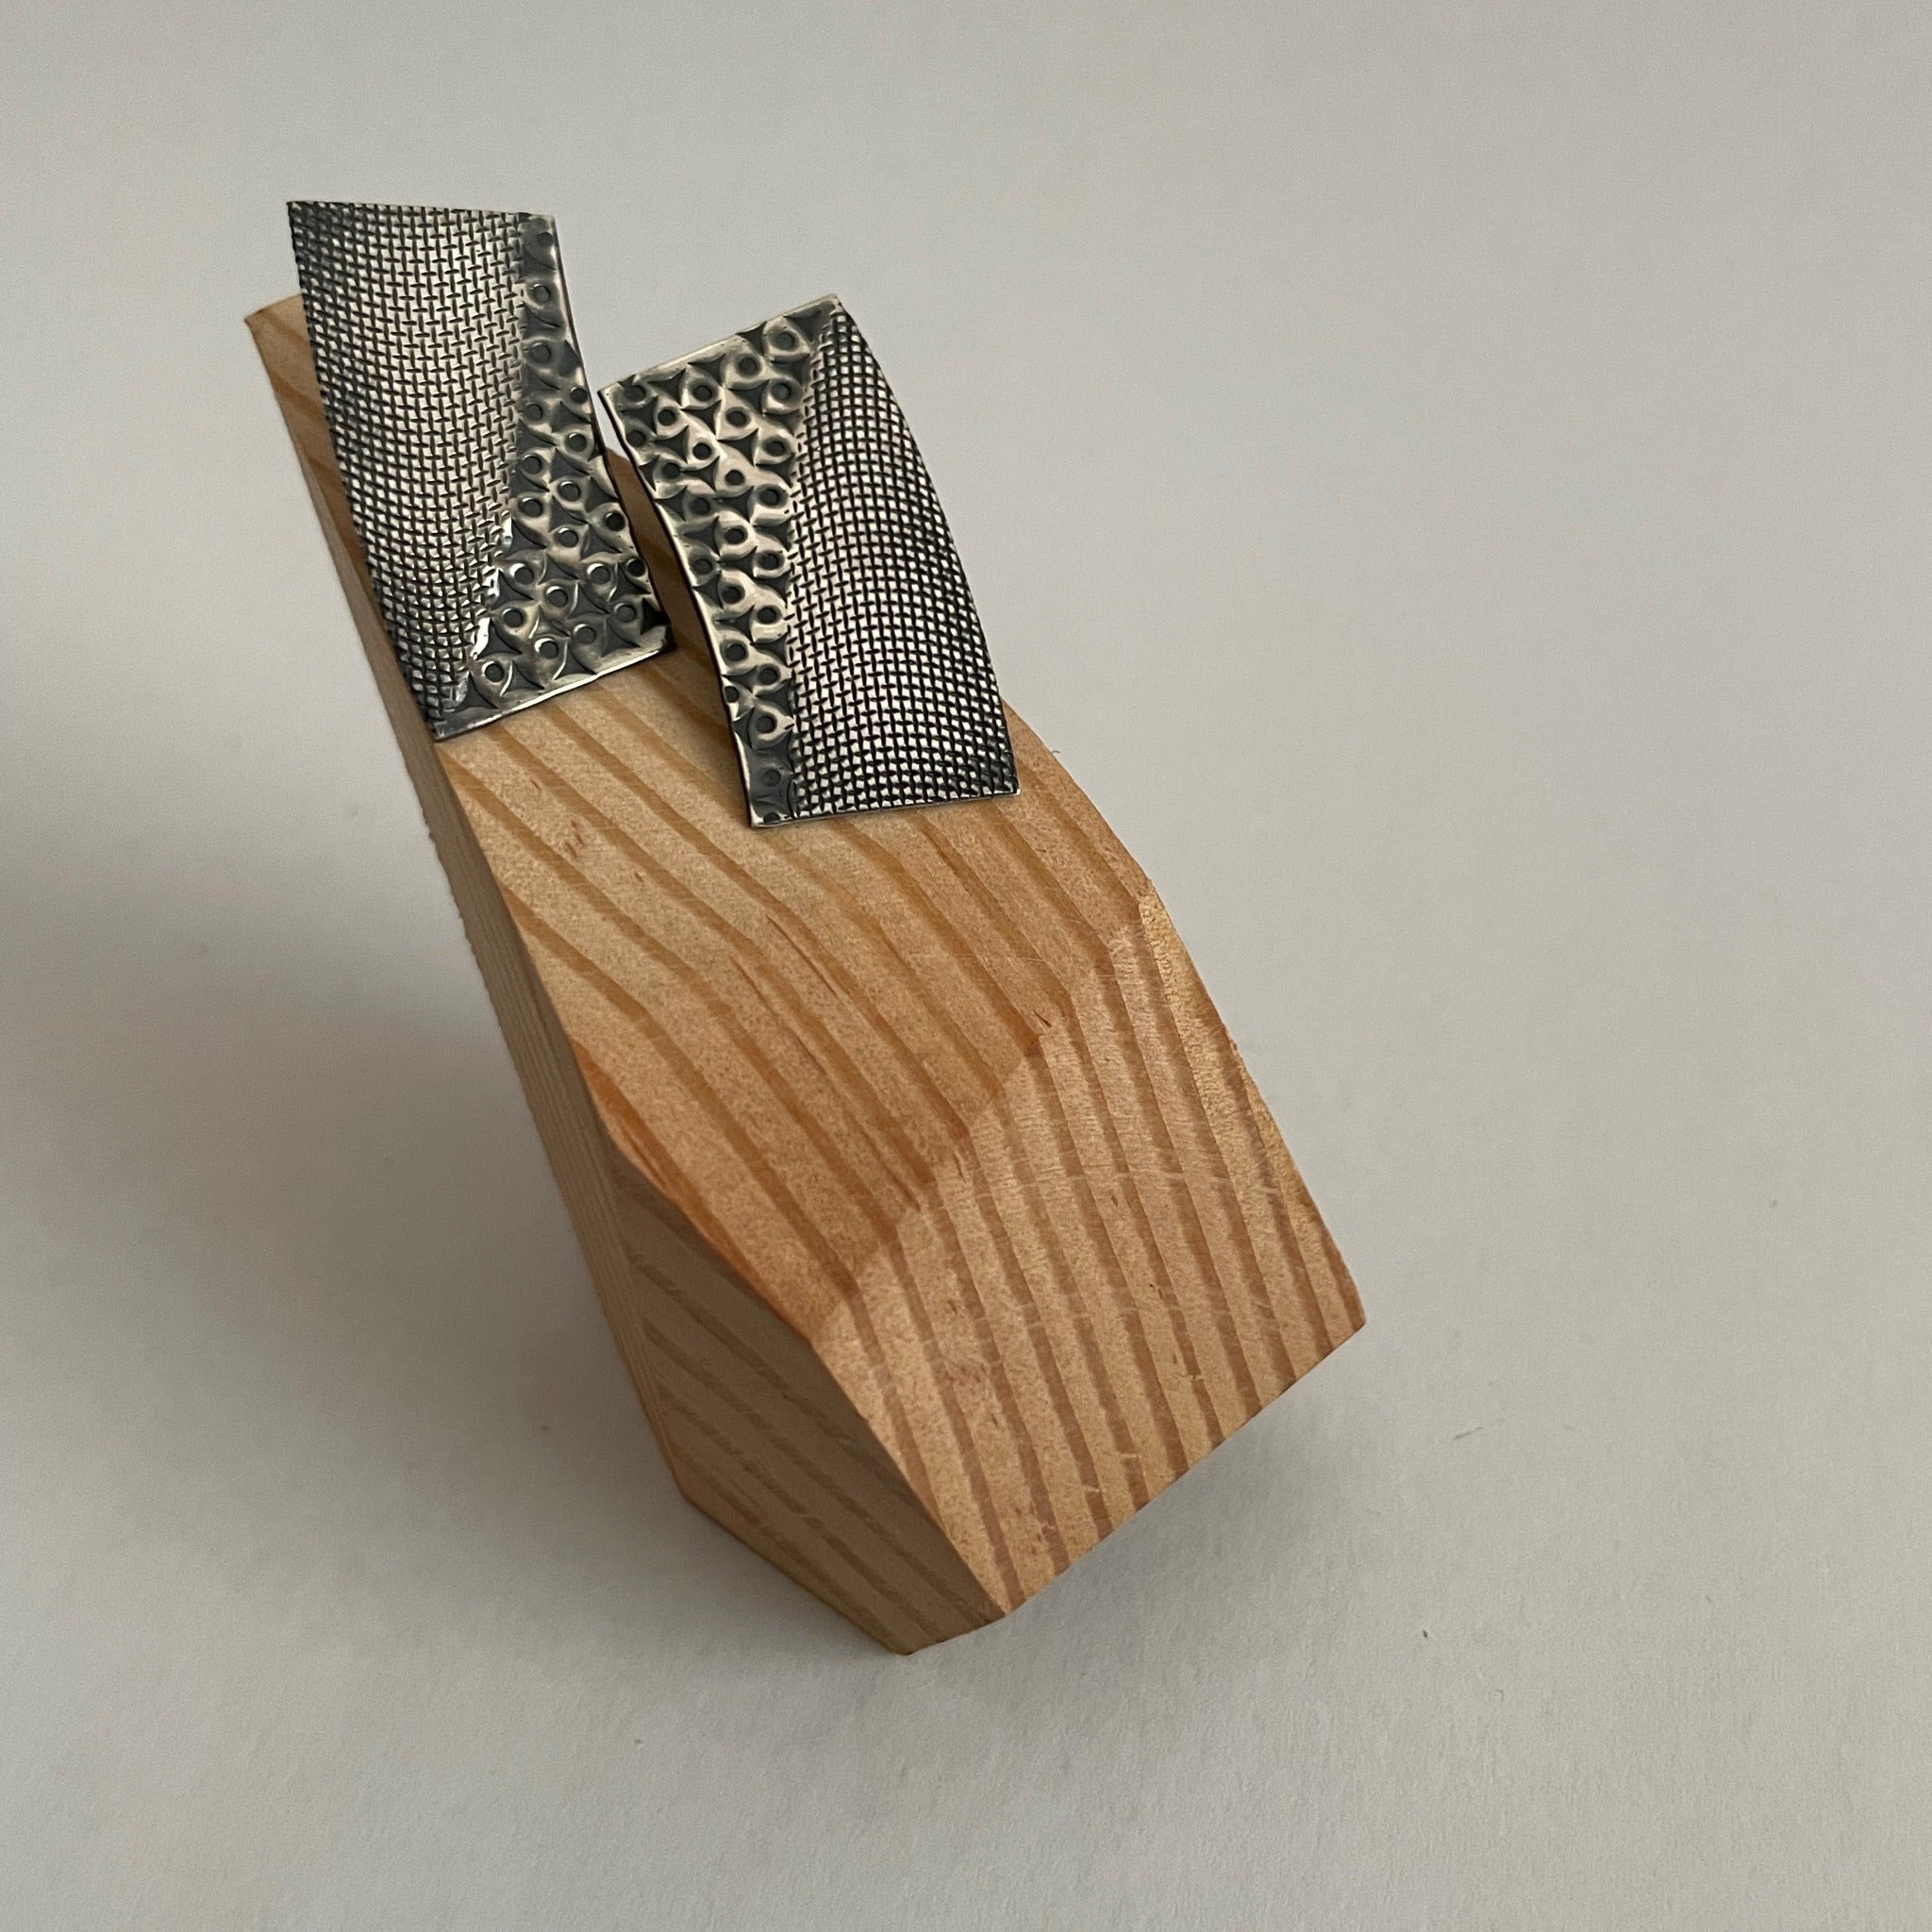 Mesh printed and hand forged stirlingsilver stud earrings by Pam de Groot